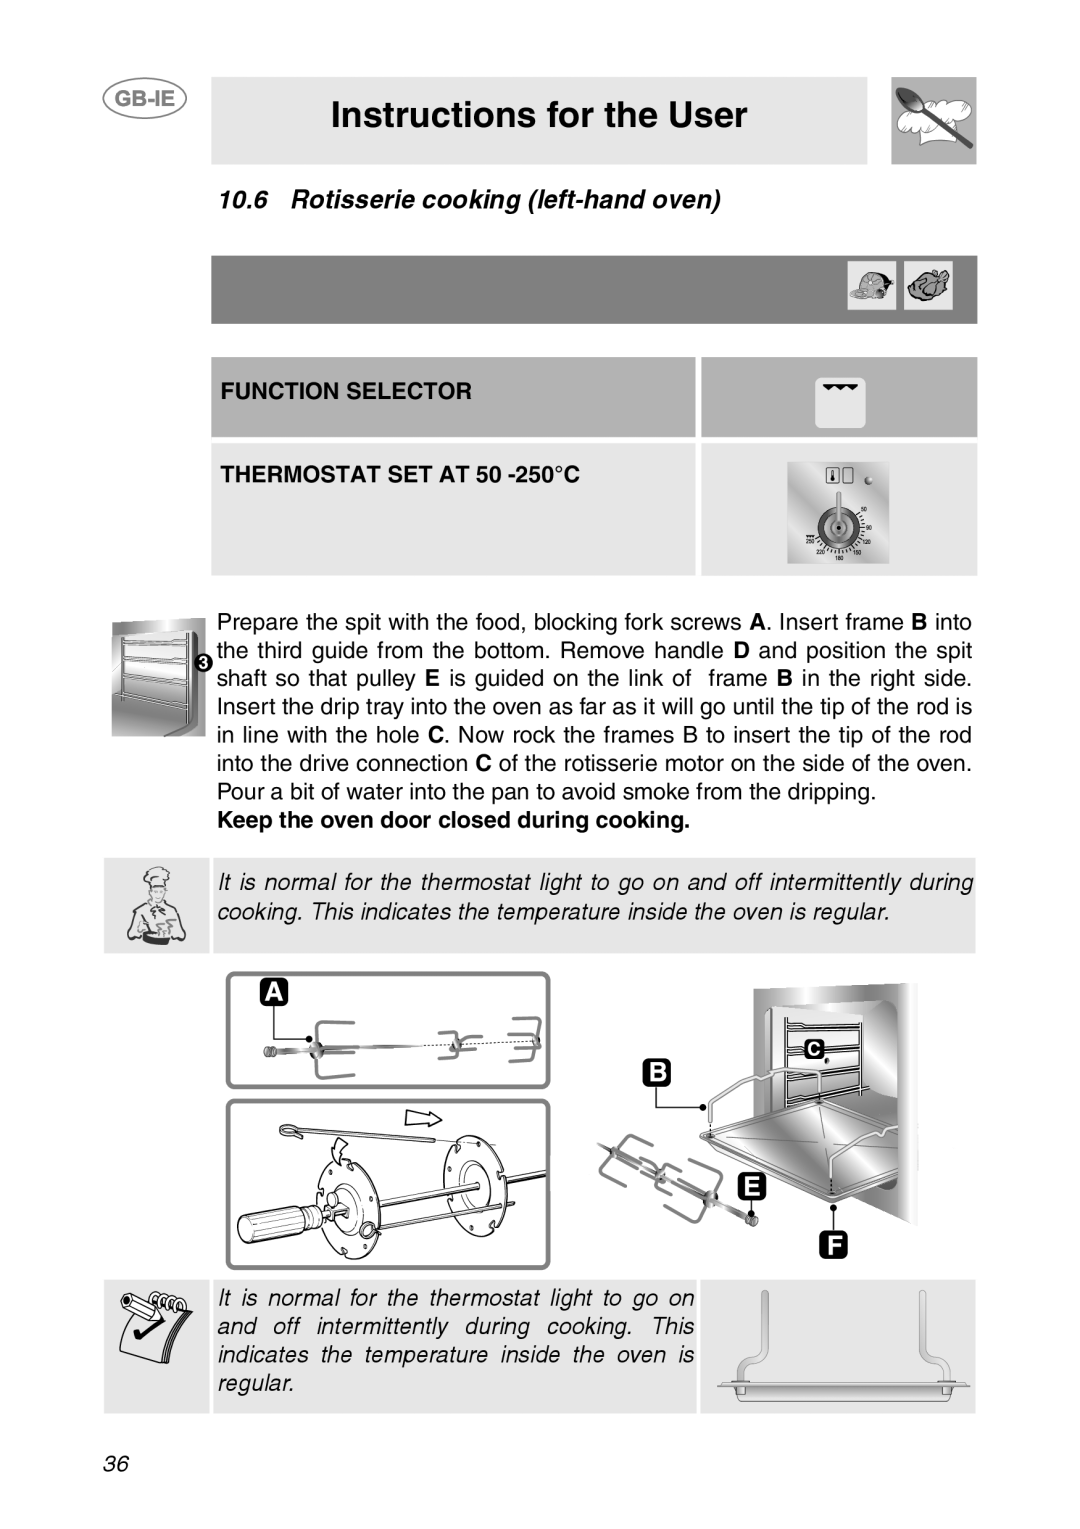 Smeg CS150SA Instructions for the User, Rotisserie cooking left-handoven, FUNCTION SELECTOR THERMOSTAT SET AT 50 -250C 